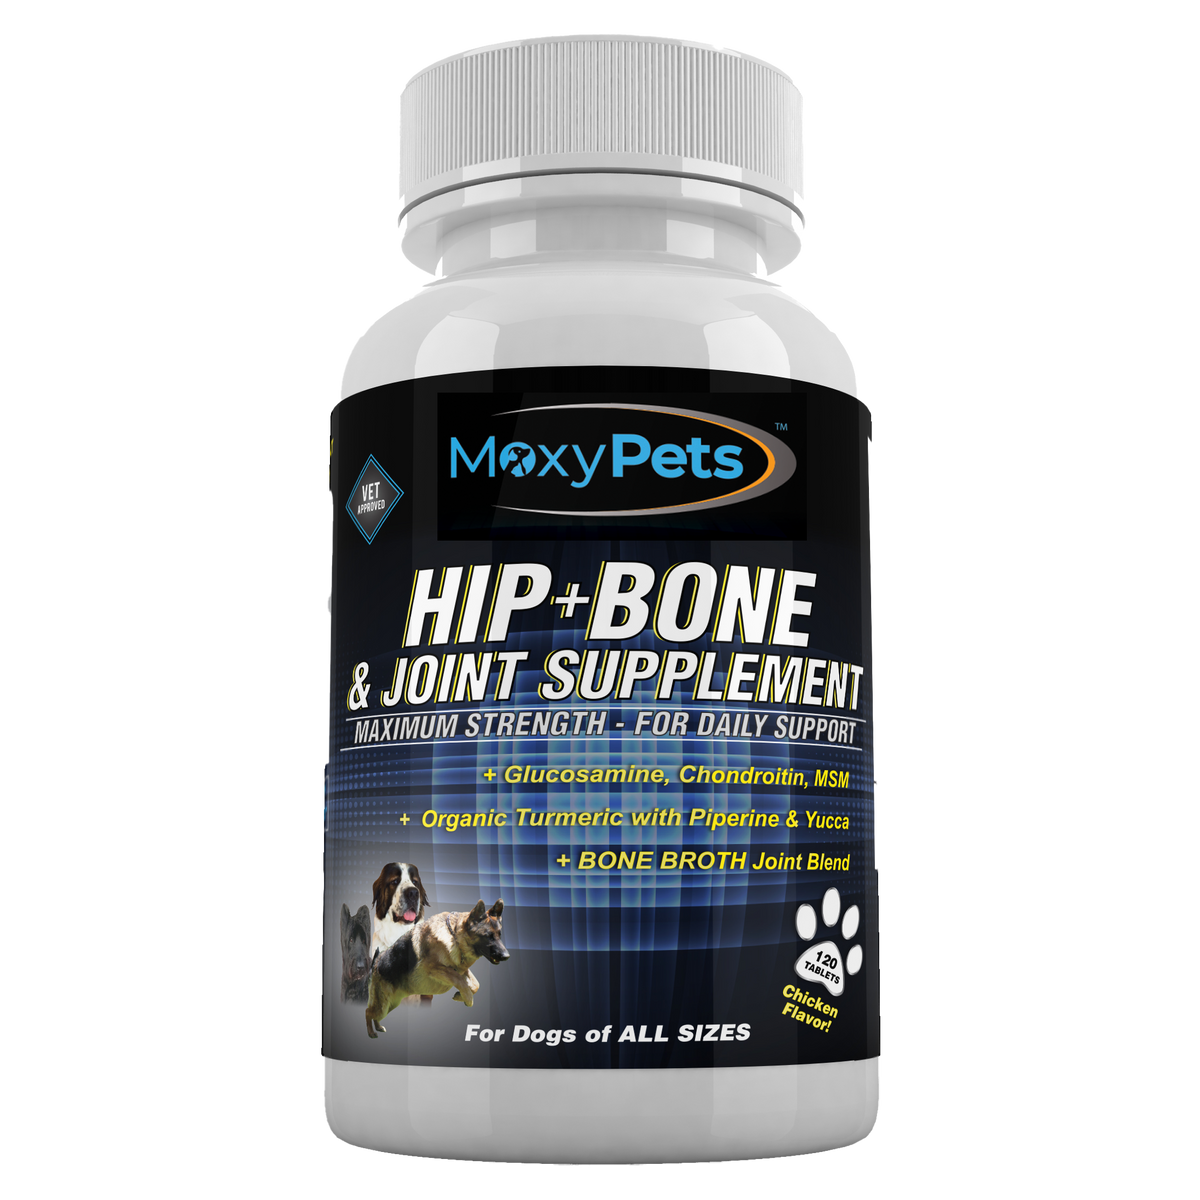 Hip Bone and Joint Supplement for Dogs - Glucosamine Chondroitin MSM